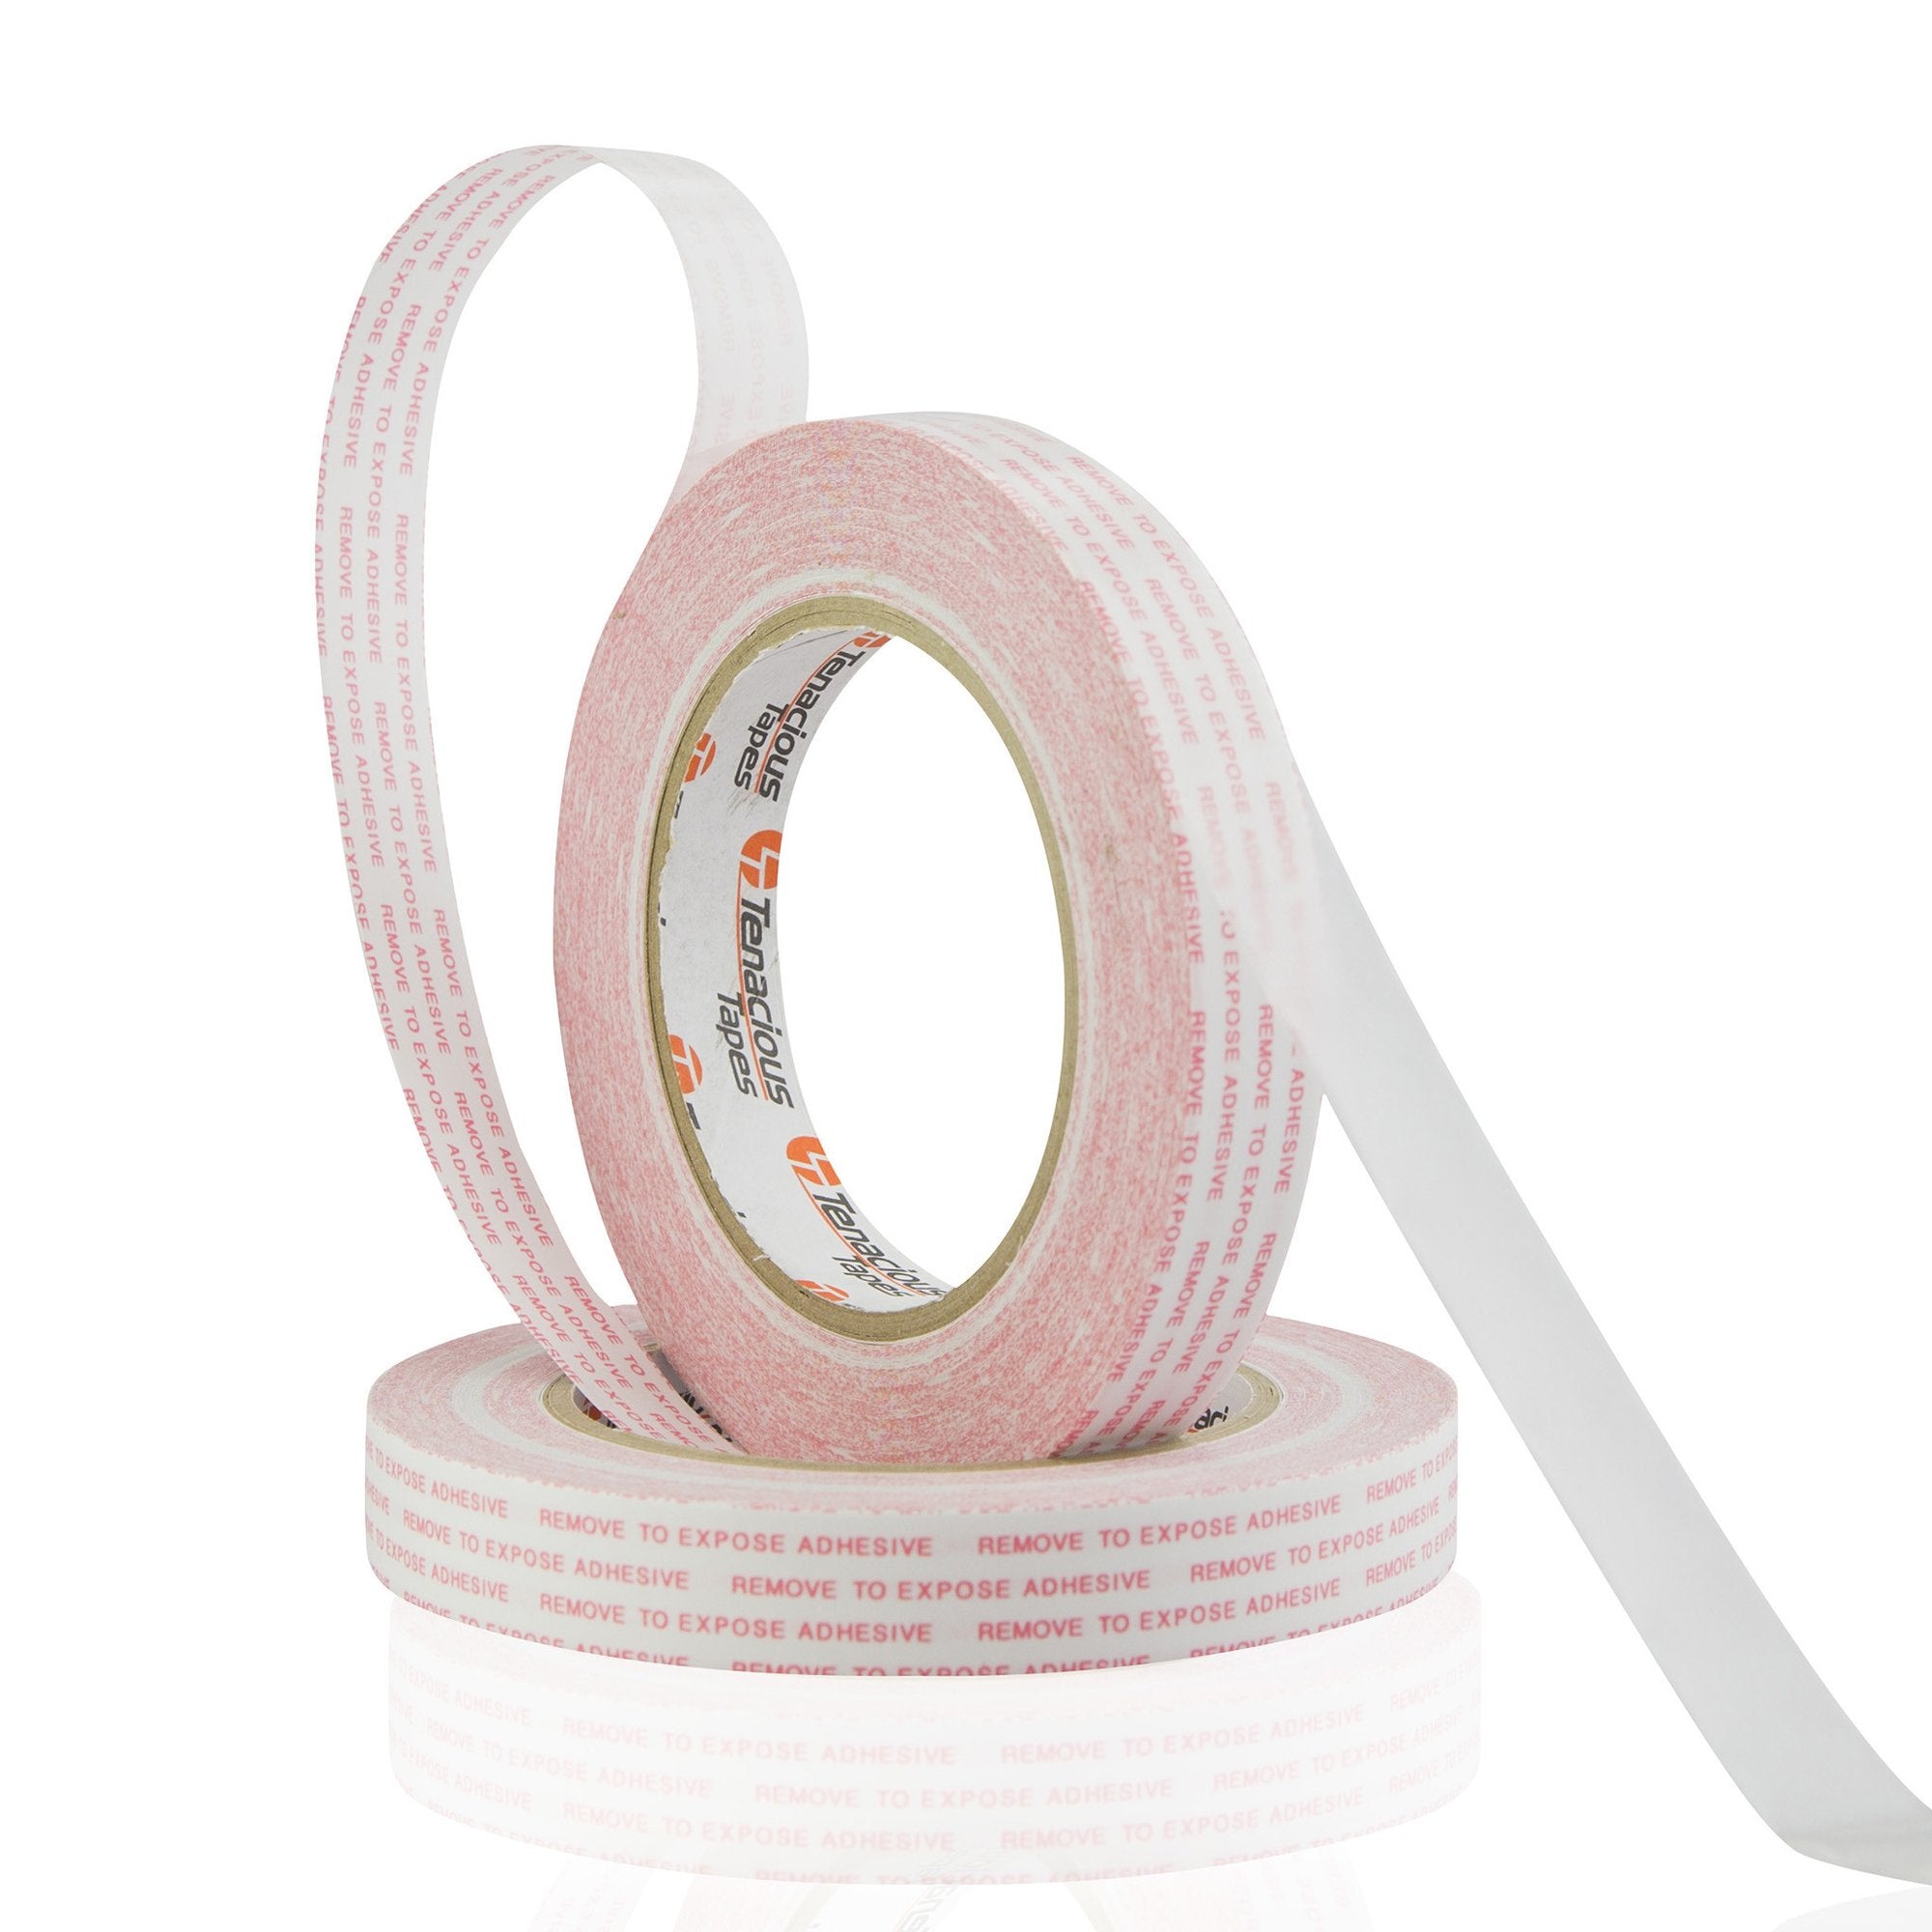 Tenacious Clear Tape 24mm x 25metres (No longer available)